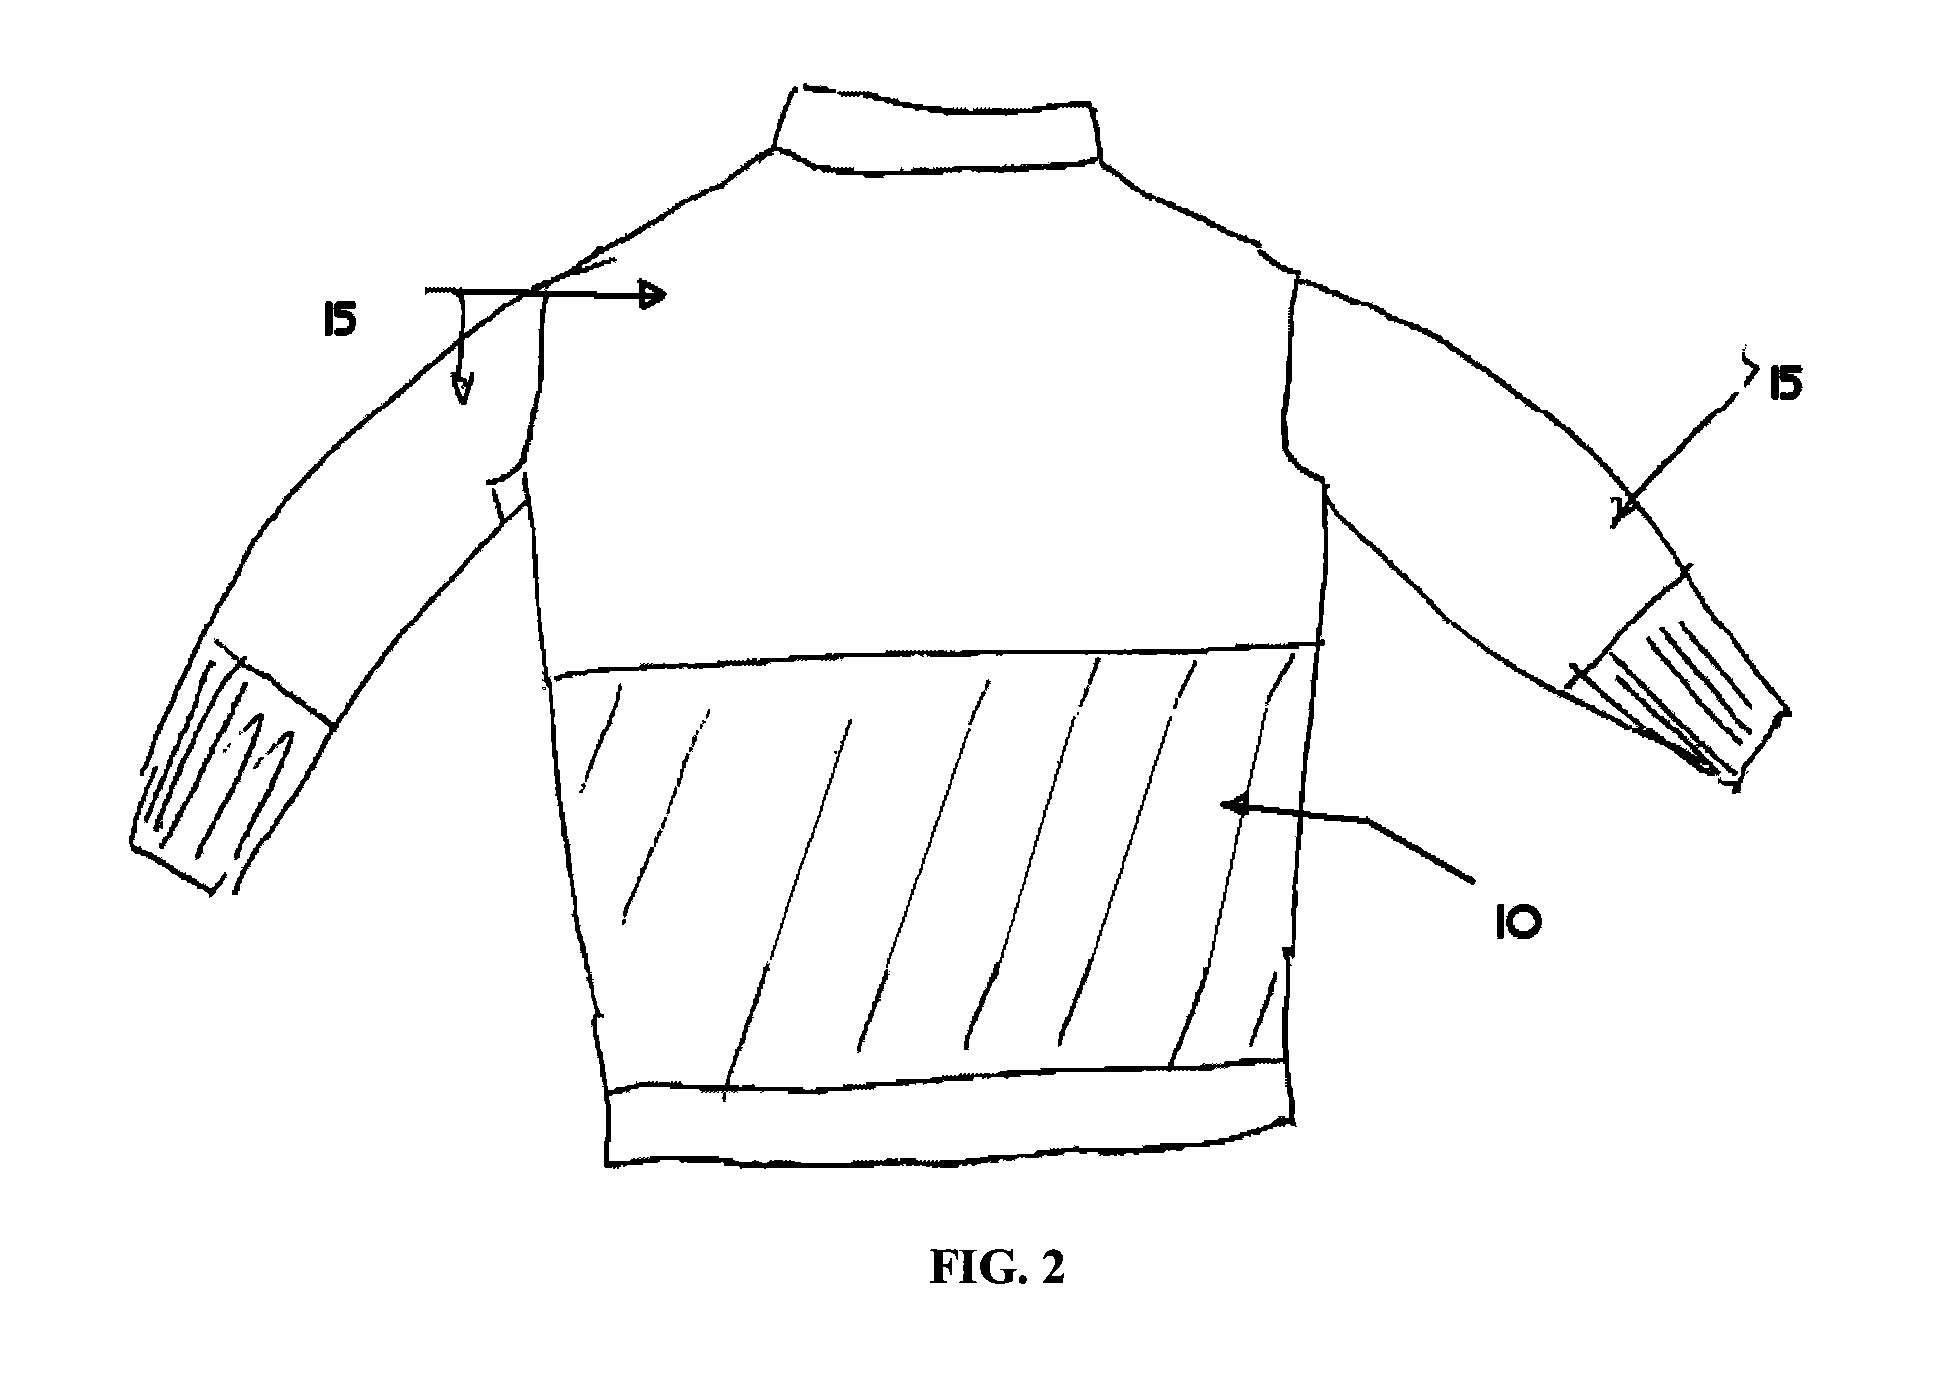 Puncture resistant, optionally cut and abrasion resistant, knit garment made with modified knit structure